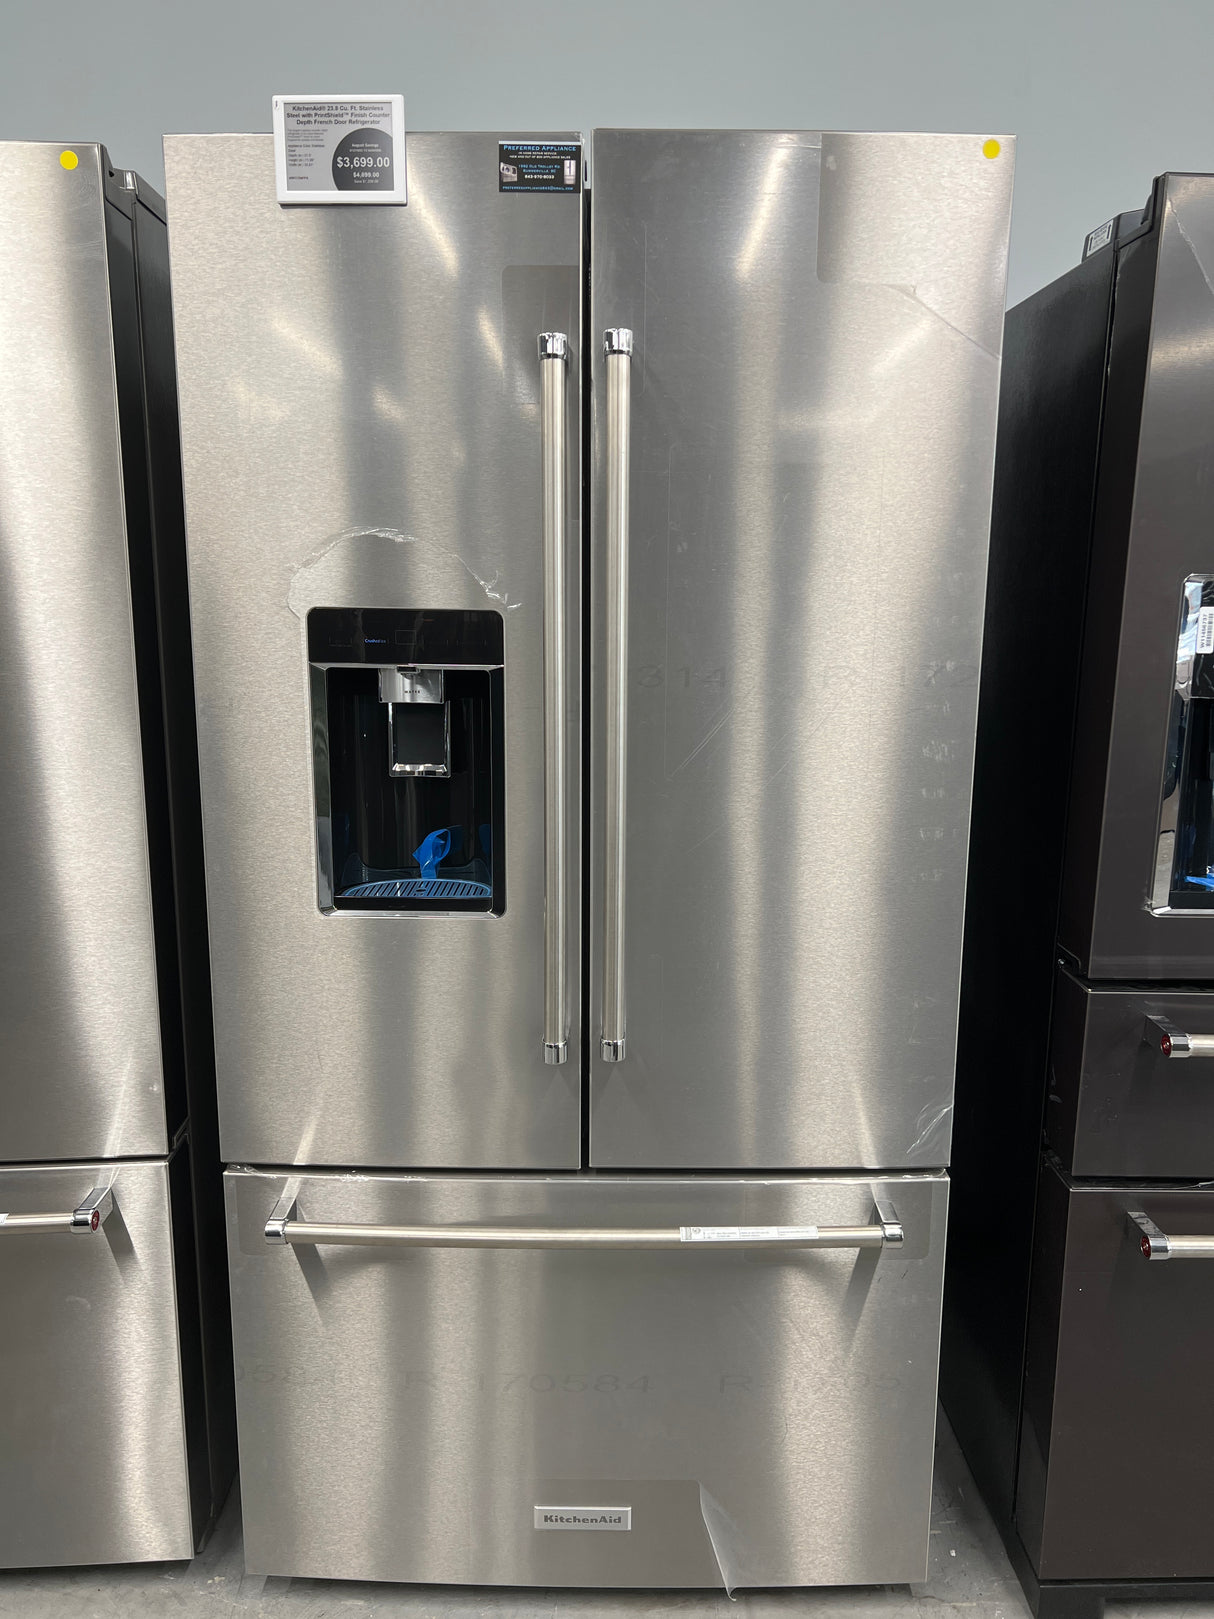 KRFC704FPS kitchenAid 23.8 ft.³ stainless steel with print shelled finish counter depth French door refrigerator.